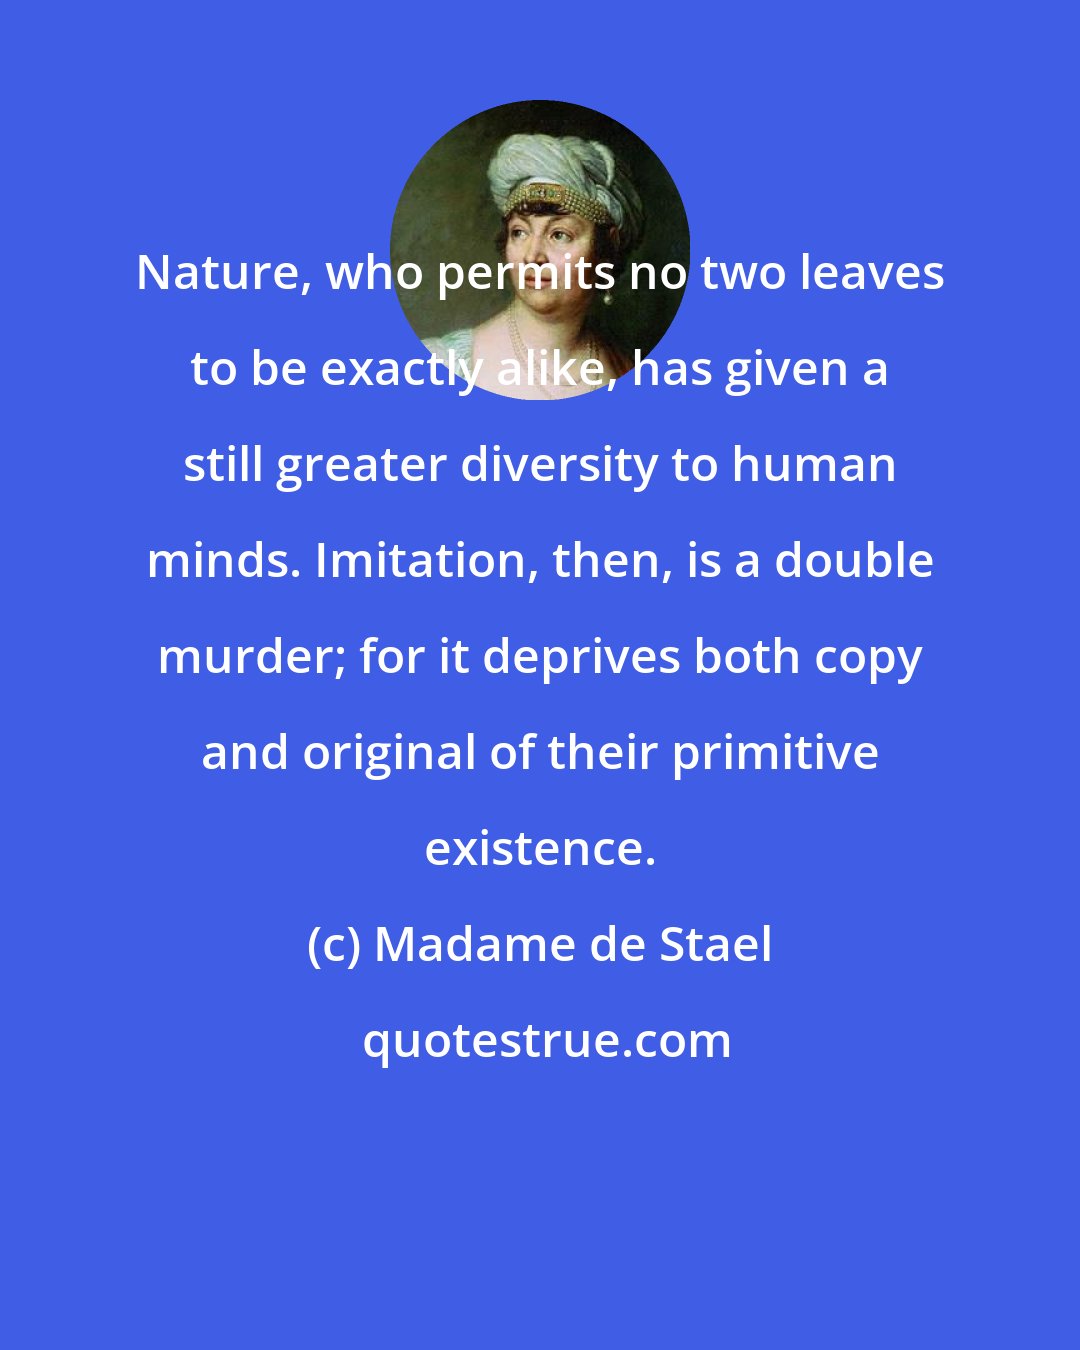 Madame de Stael: Nature, who permits no two leaves to be exactly alike, has given a still greater diversity to human minds. Imitation, then, is a double murder; for it deprives both copy and original of their primitive existence.